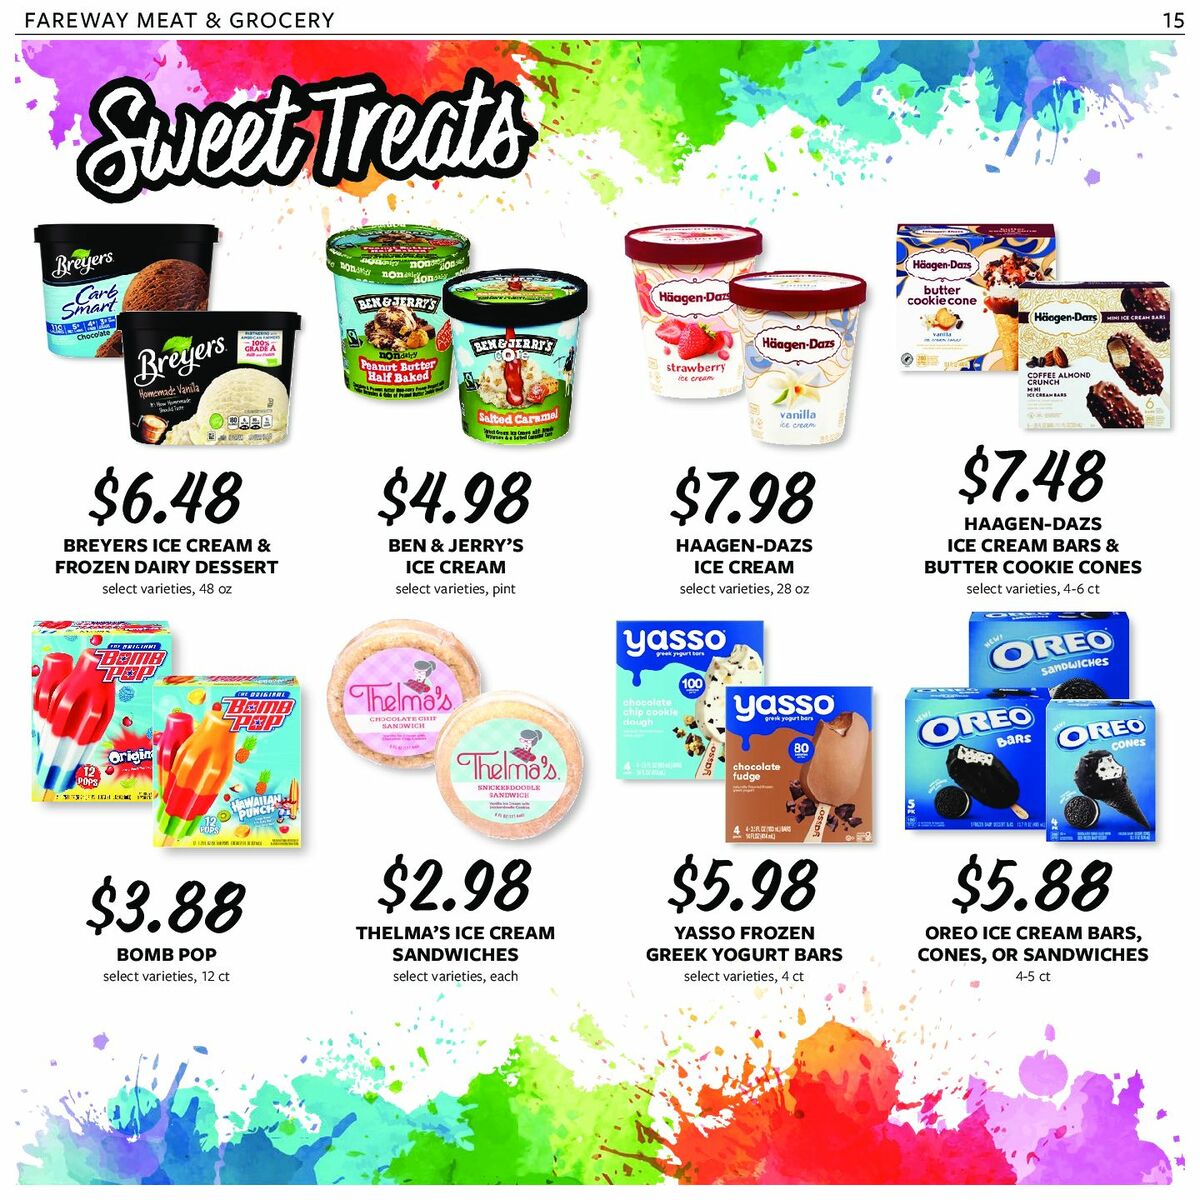 Fareway Weekly Ad from July 10